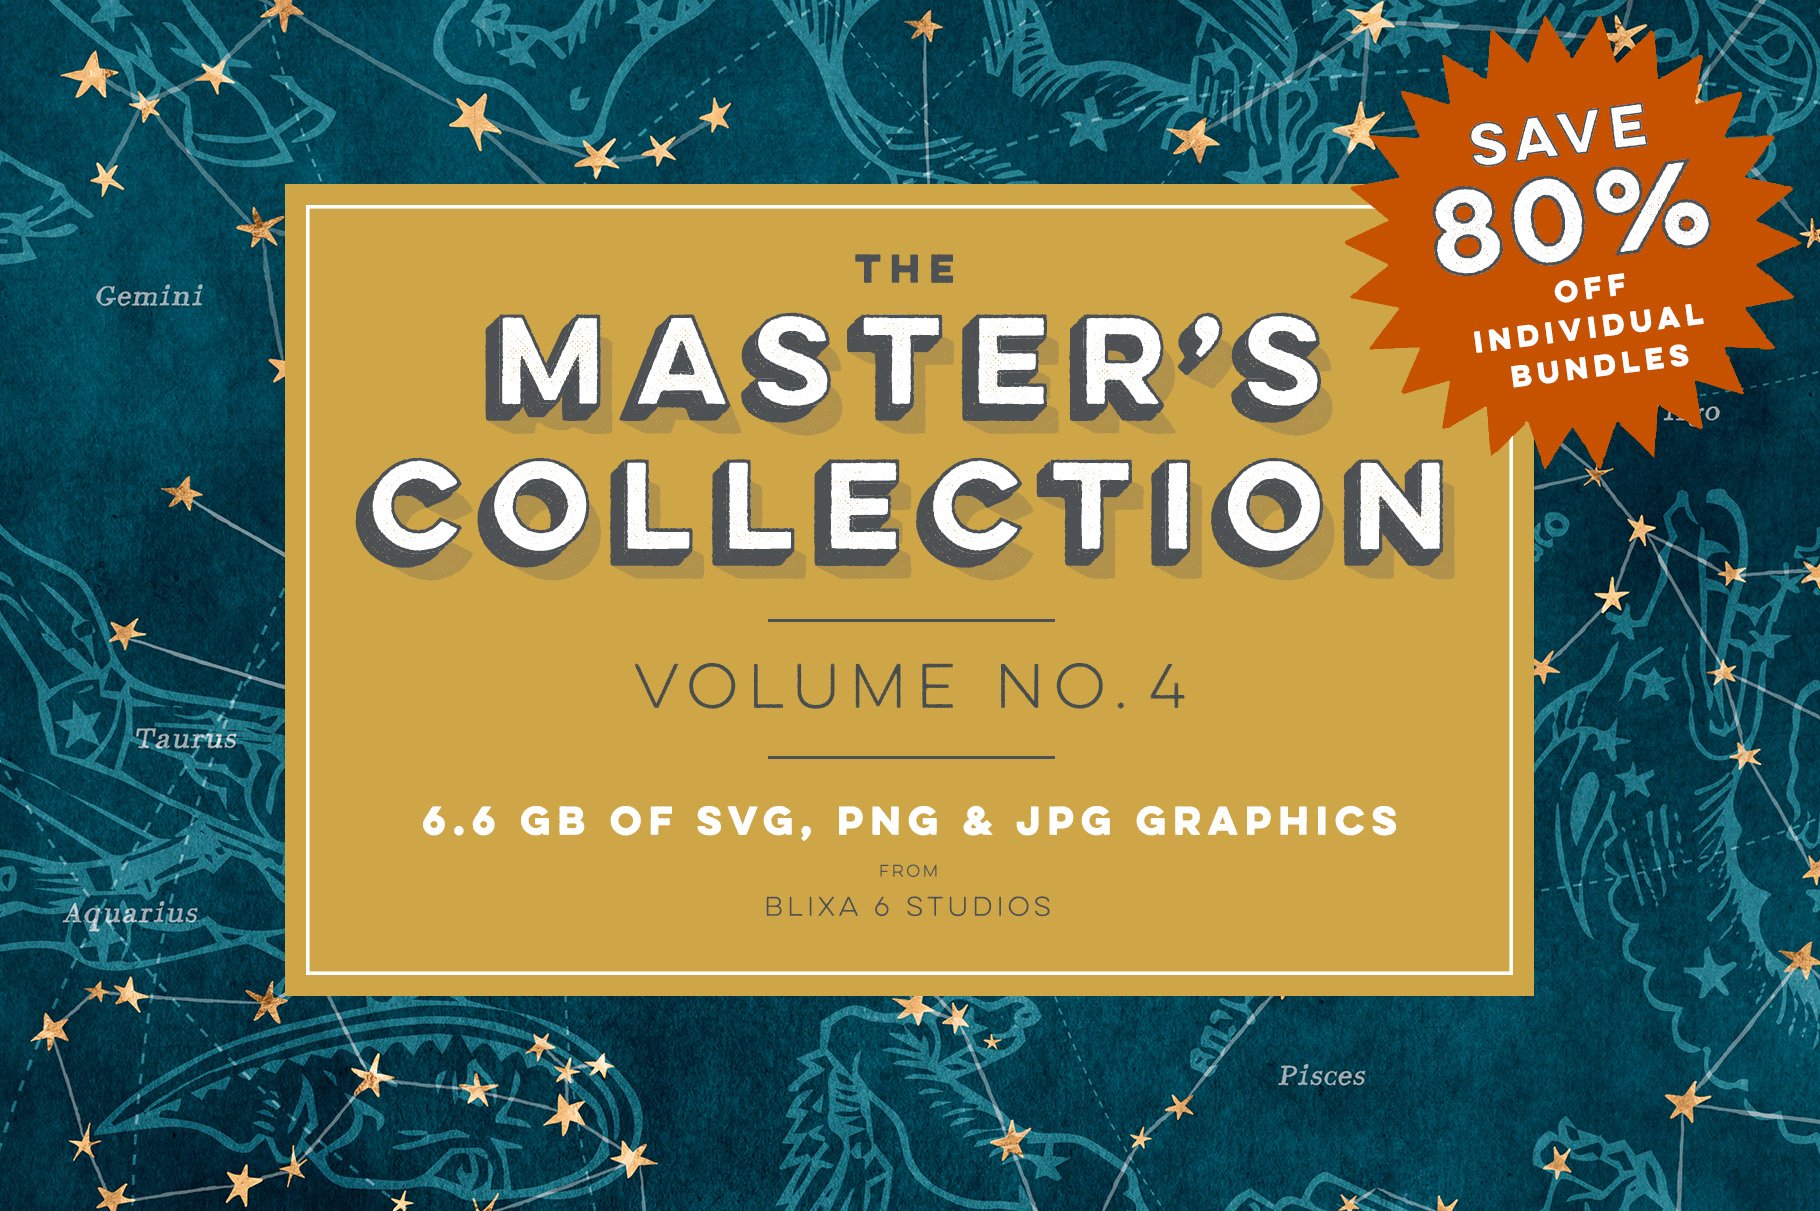 Master's Collection: Volume No. 4 cover image.